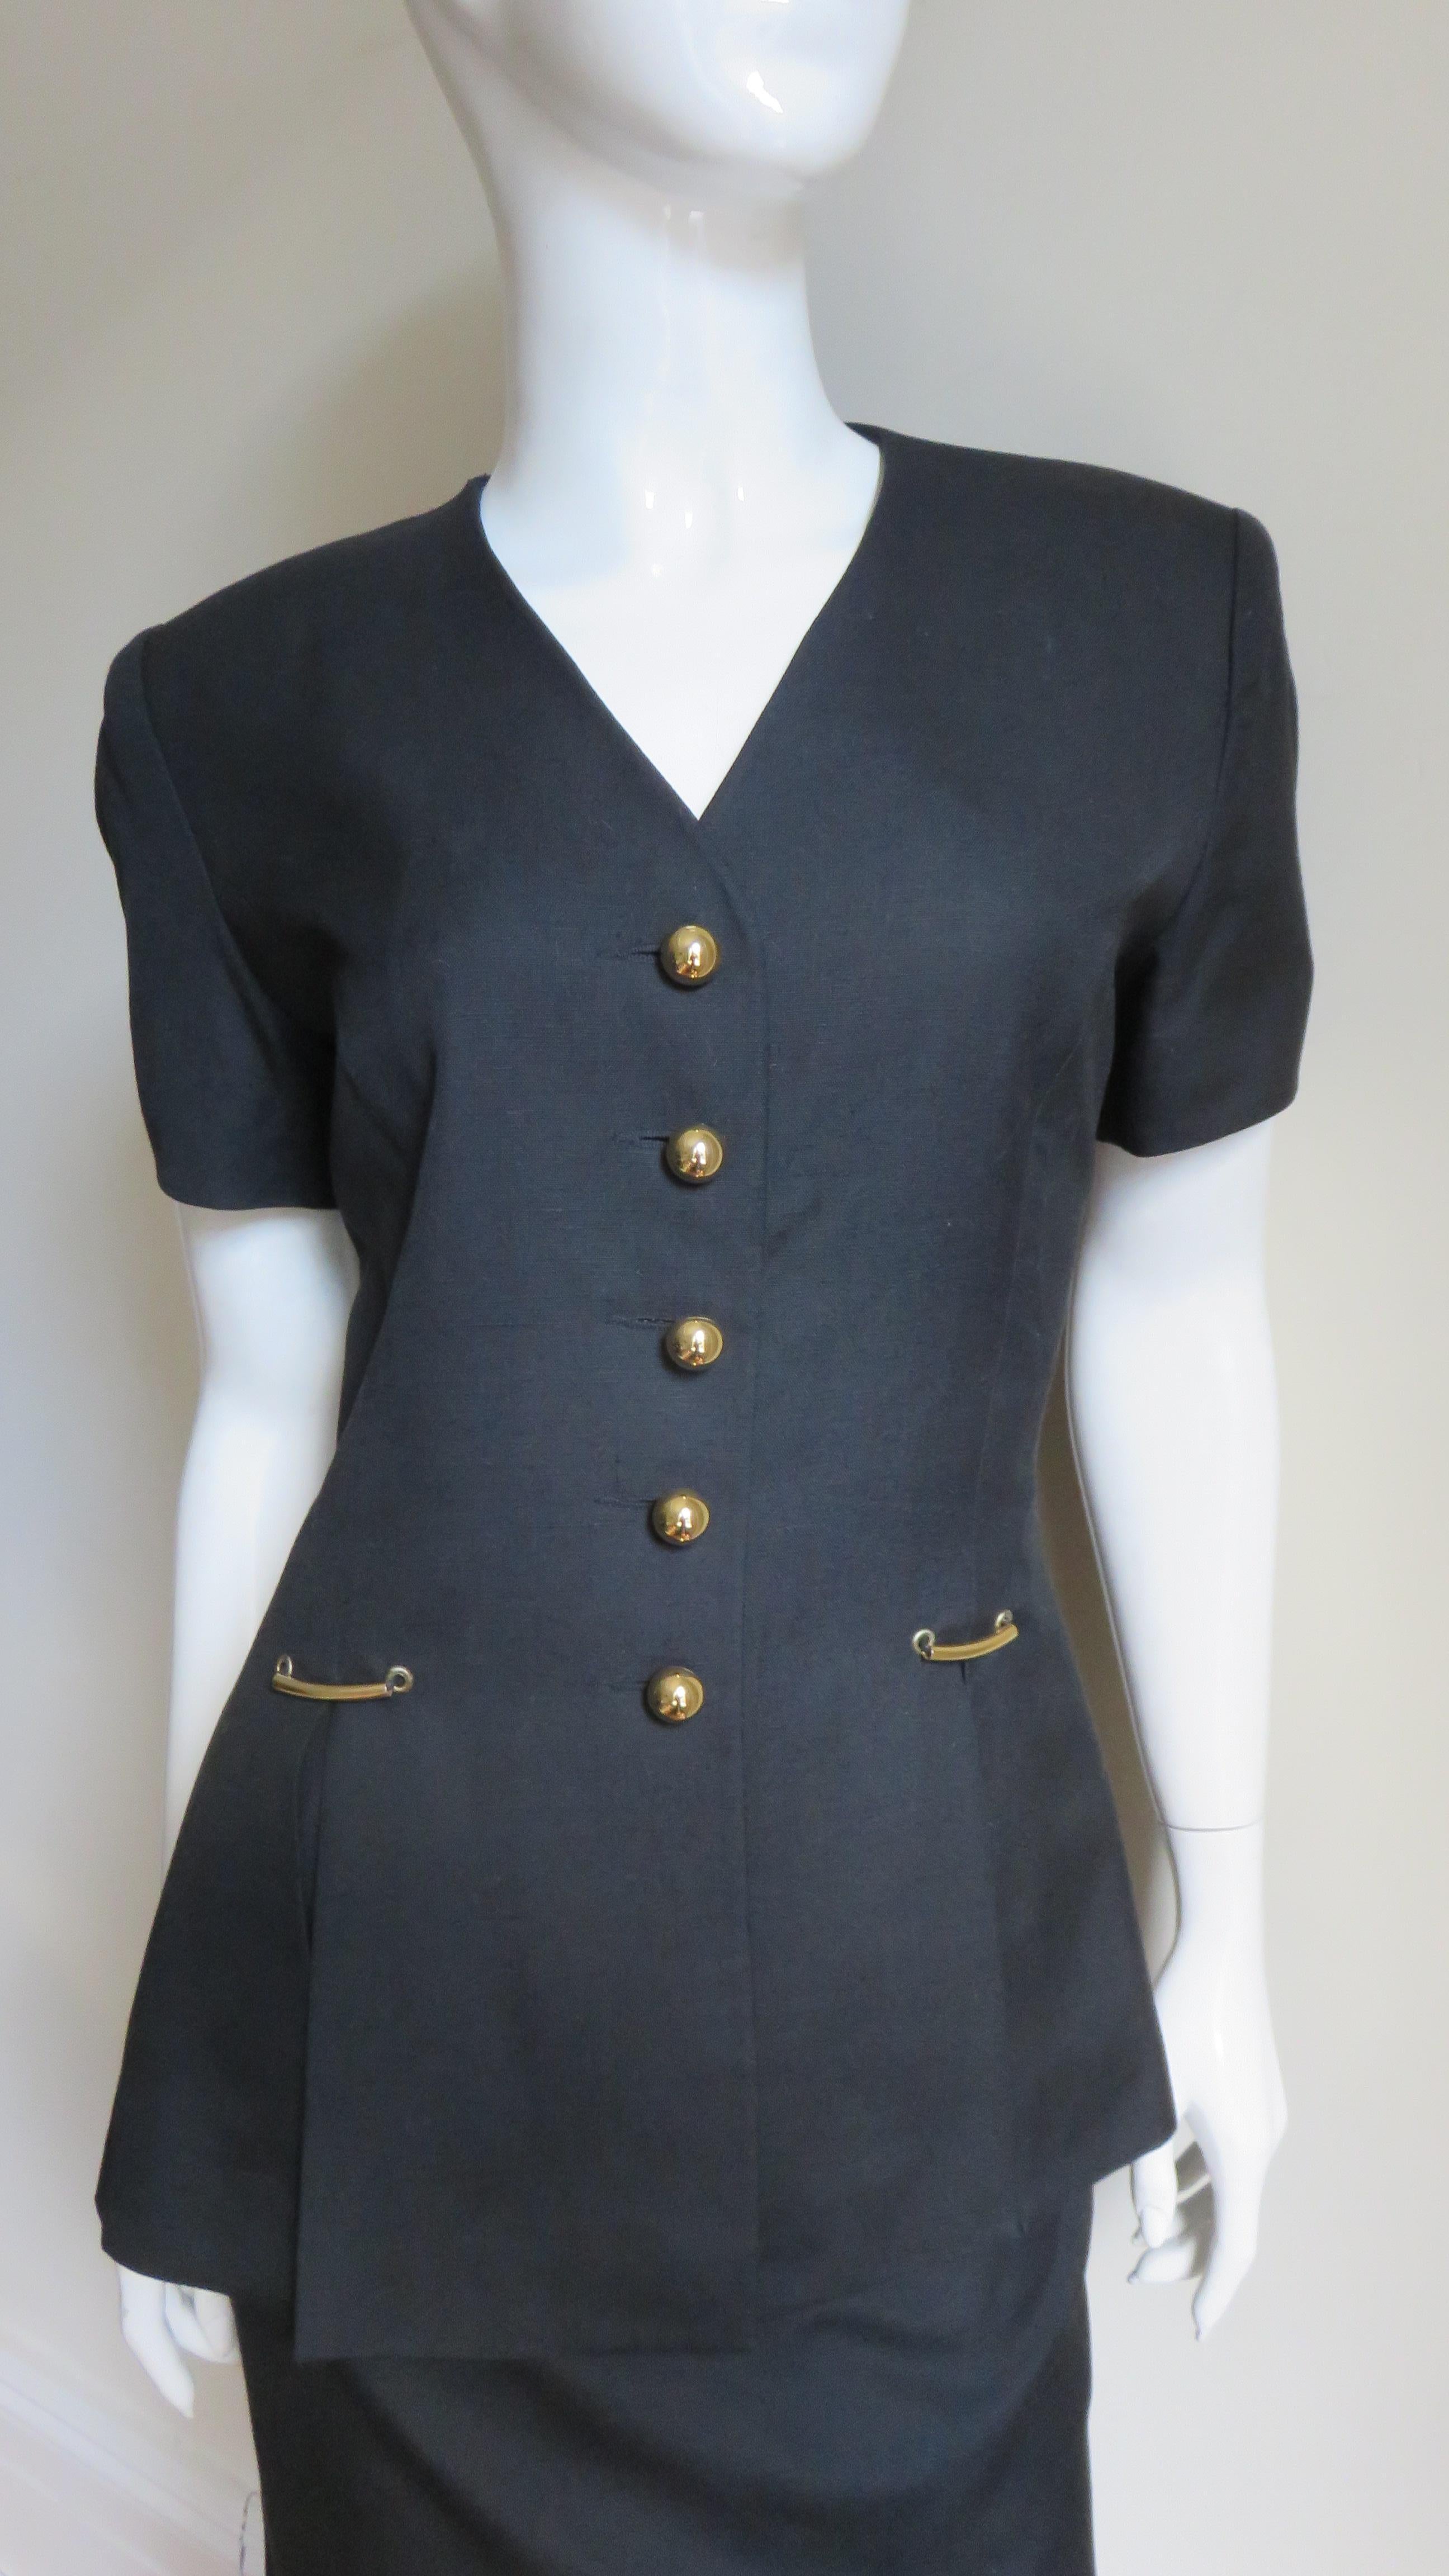 Black Gianfranco Ferre Skirt Suit with Cut out Jacket